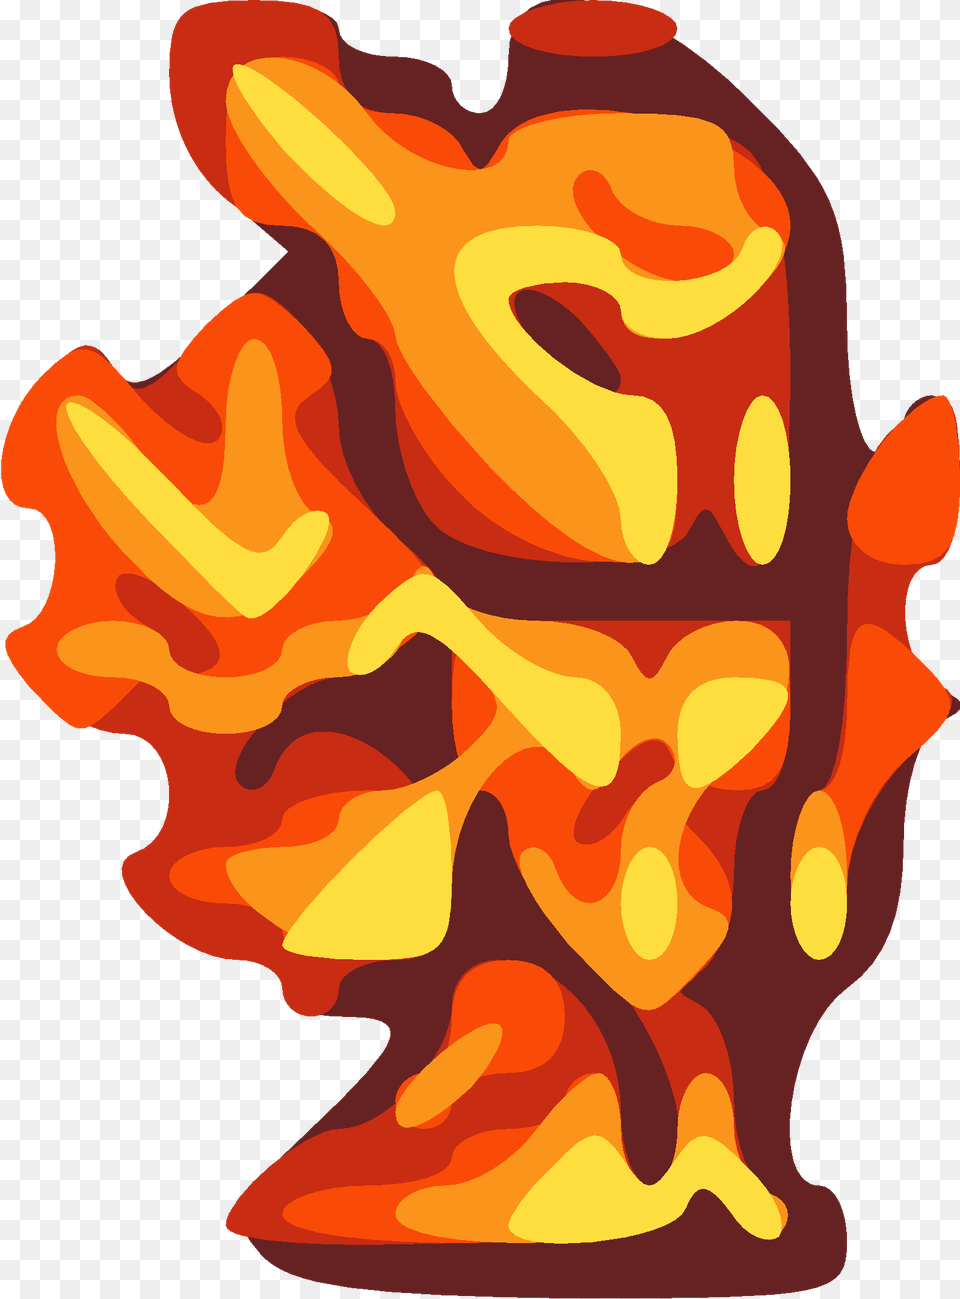 Clip Art, Fire, Flame, Baby, Outdoors Png